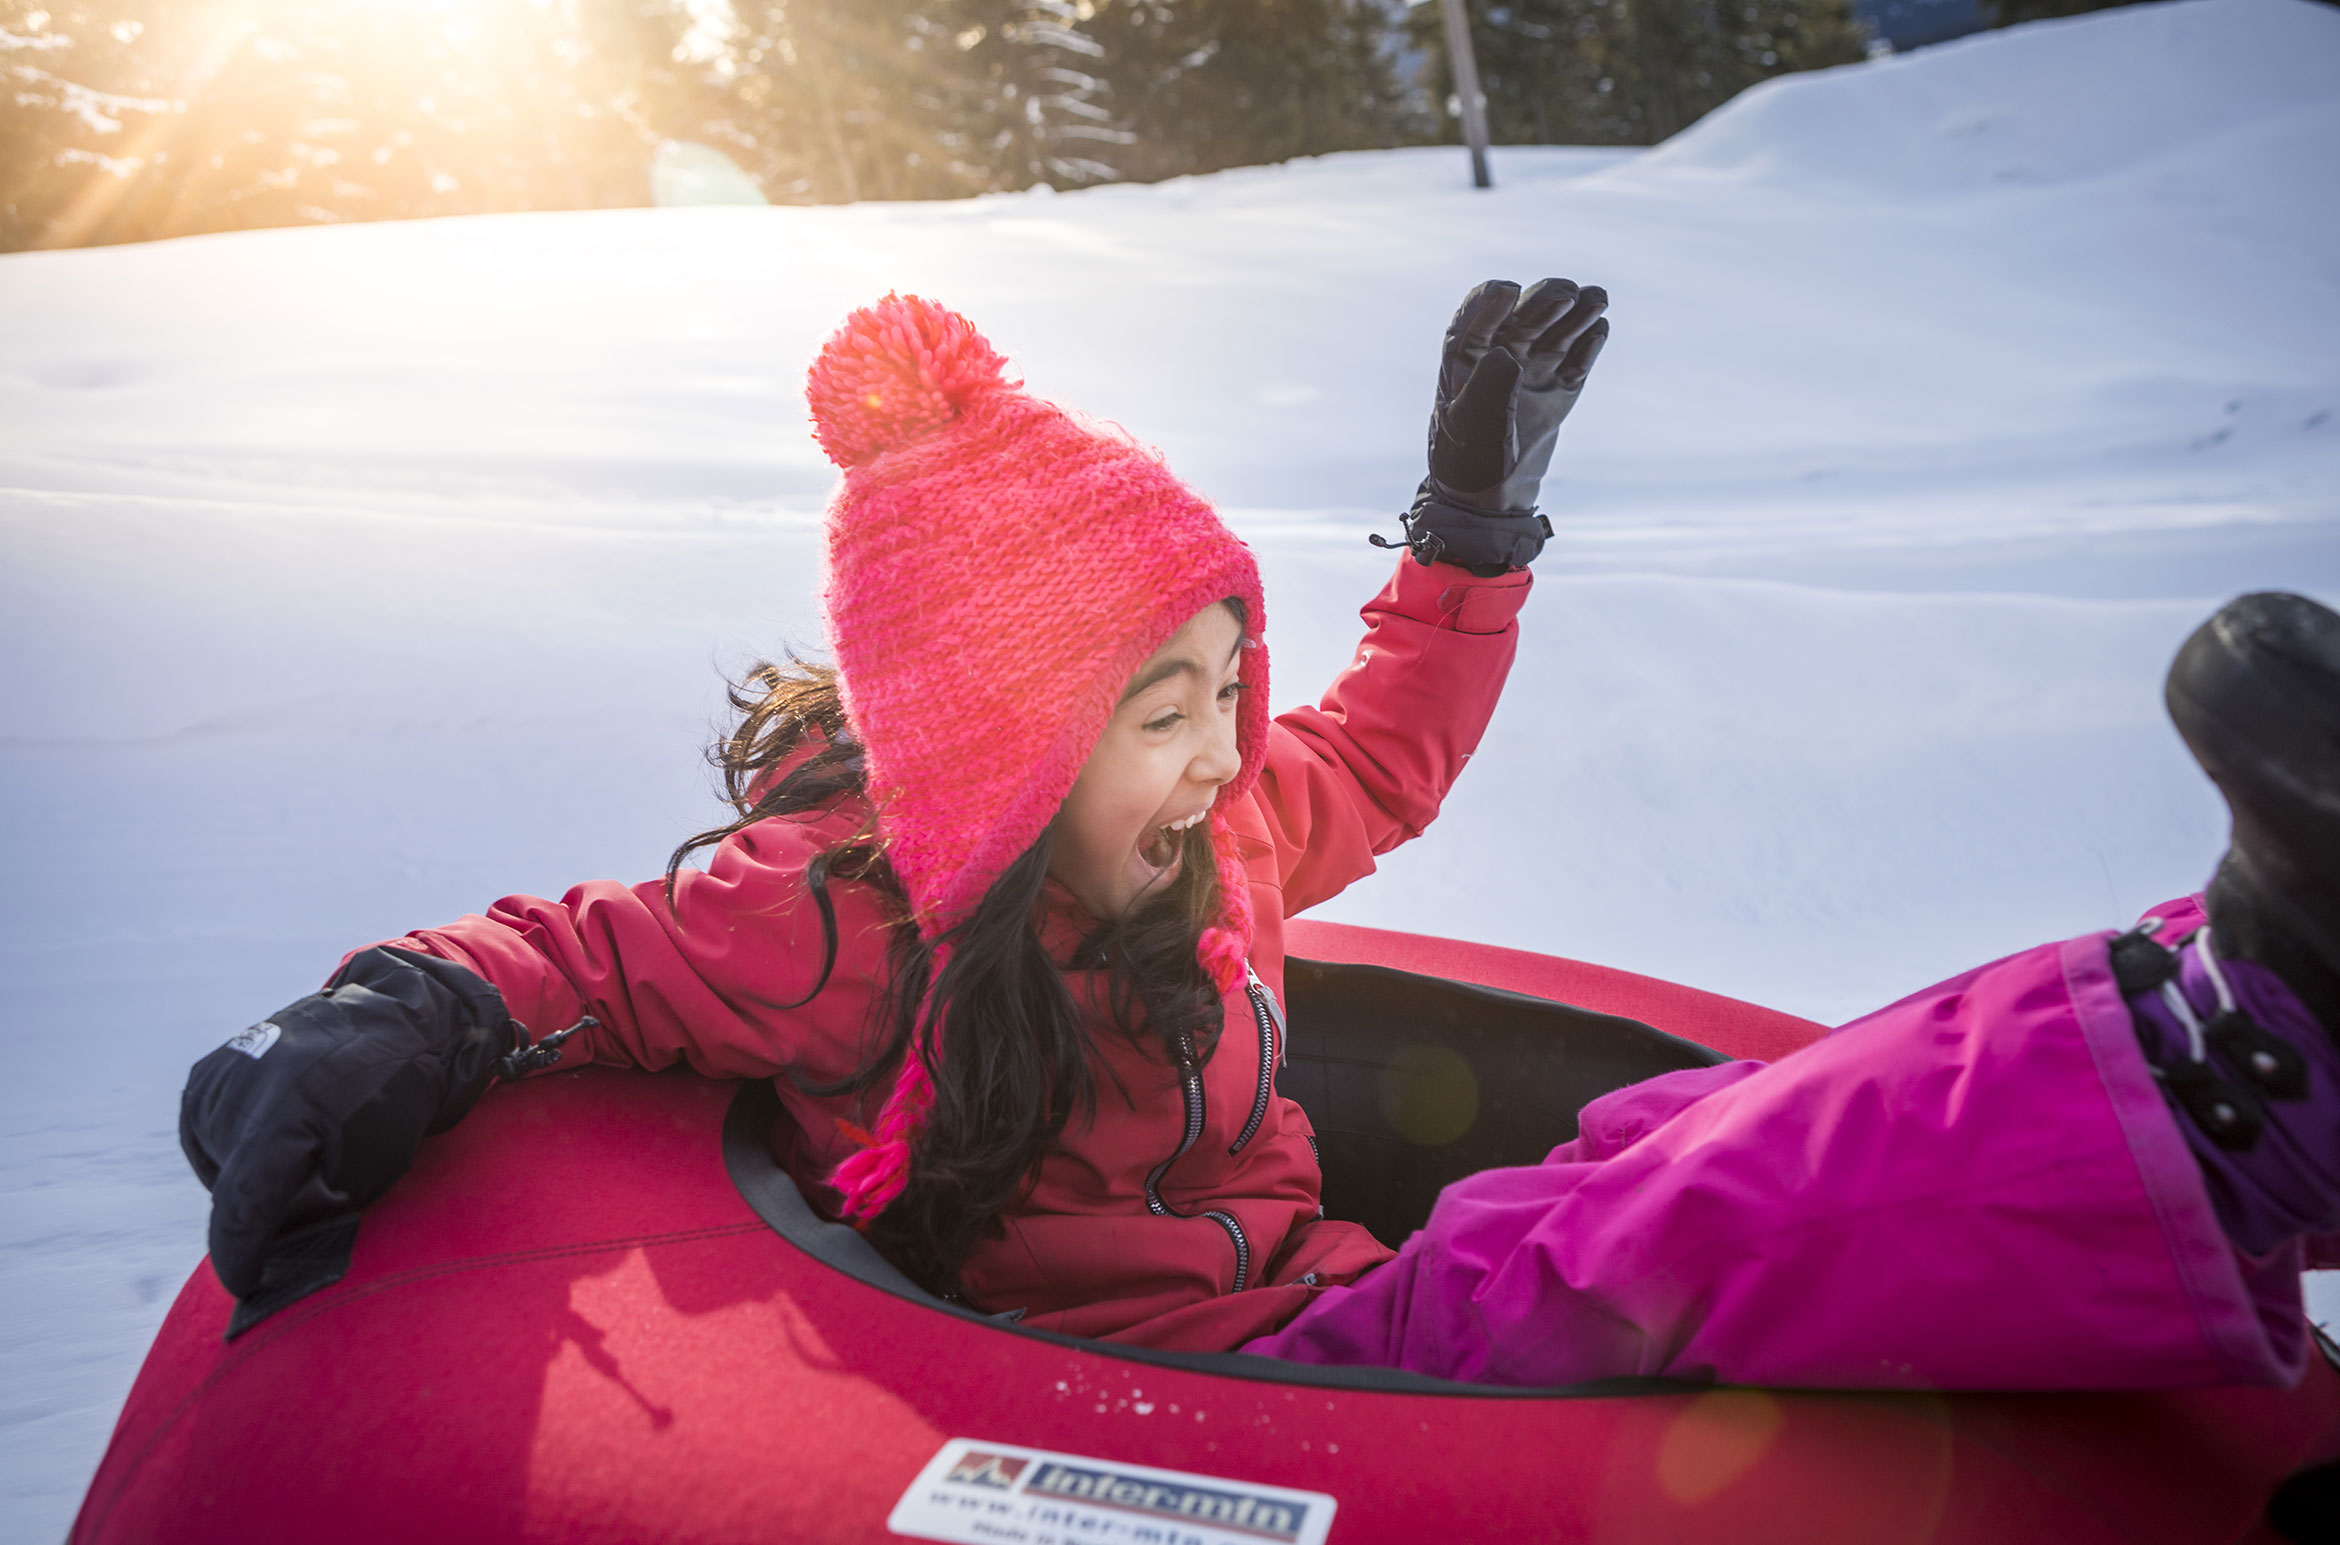 A young girl screams with delight as she slides down an icy track at the Whistler Tube Park.